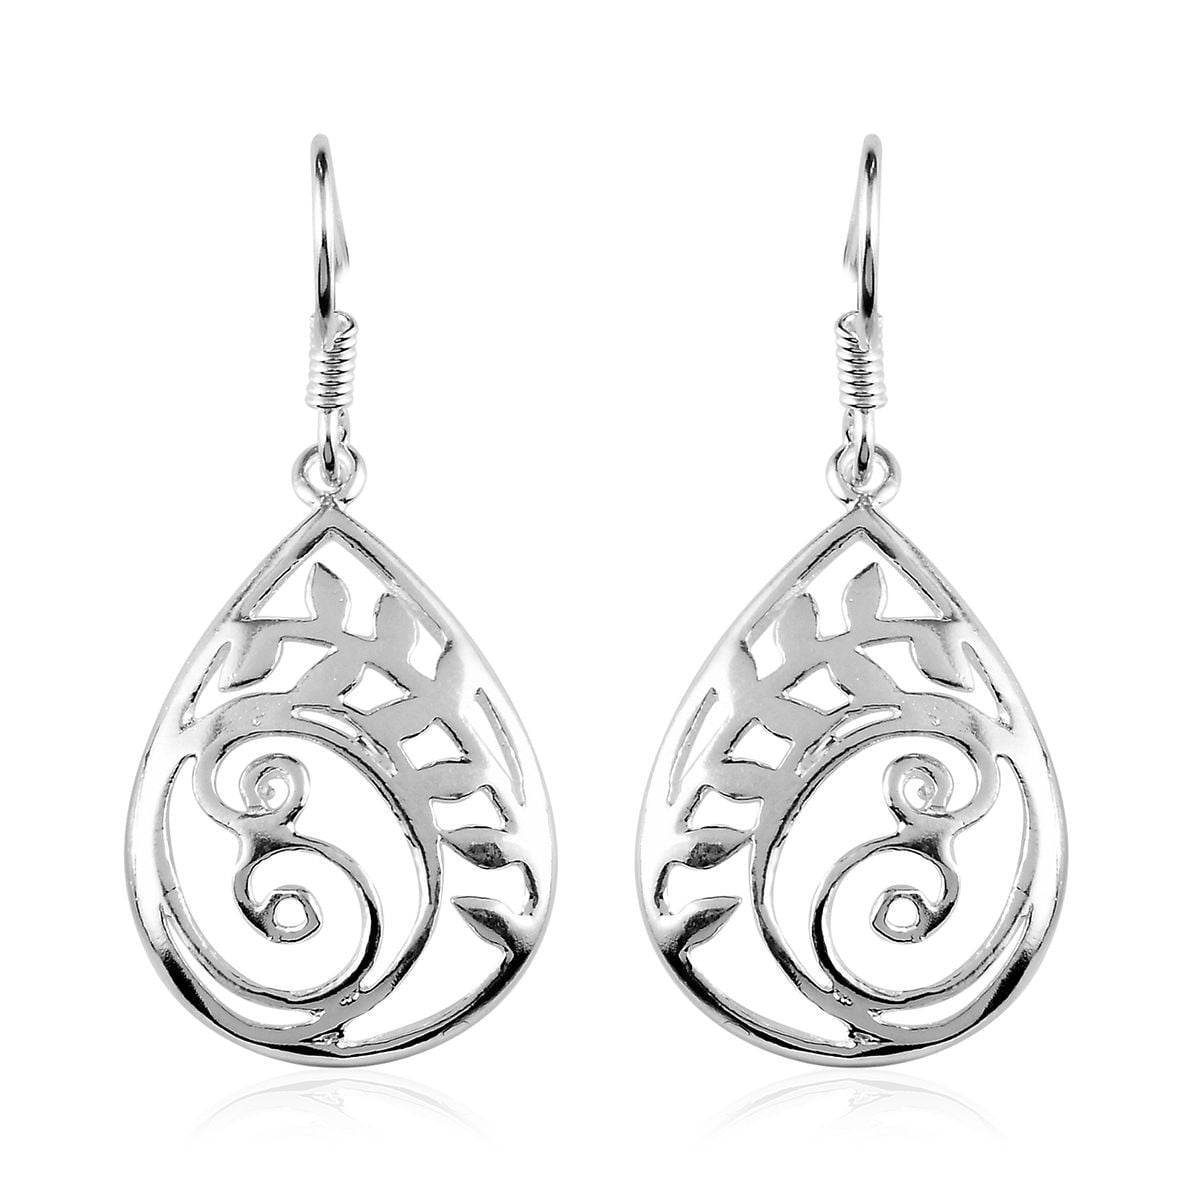 Details about   Celtic Long Trinity Earrings Drop Sterling Silver 925 Hallmarked Drops 